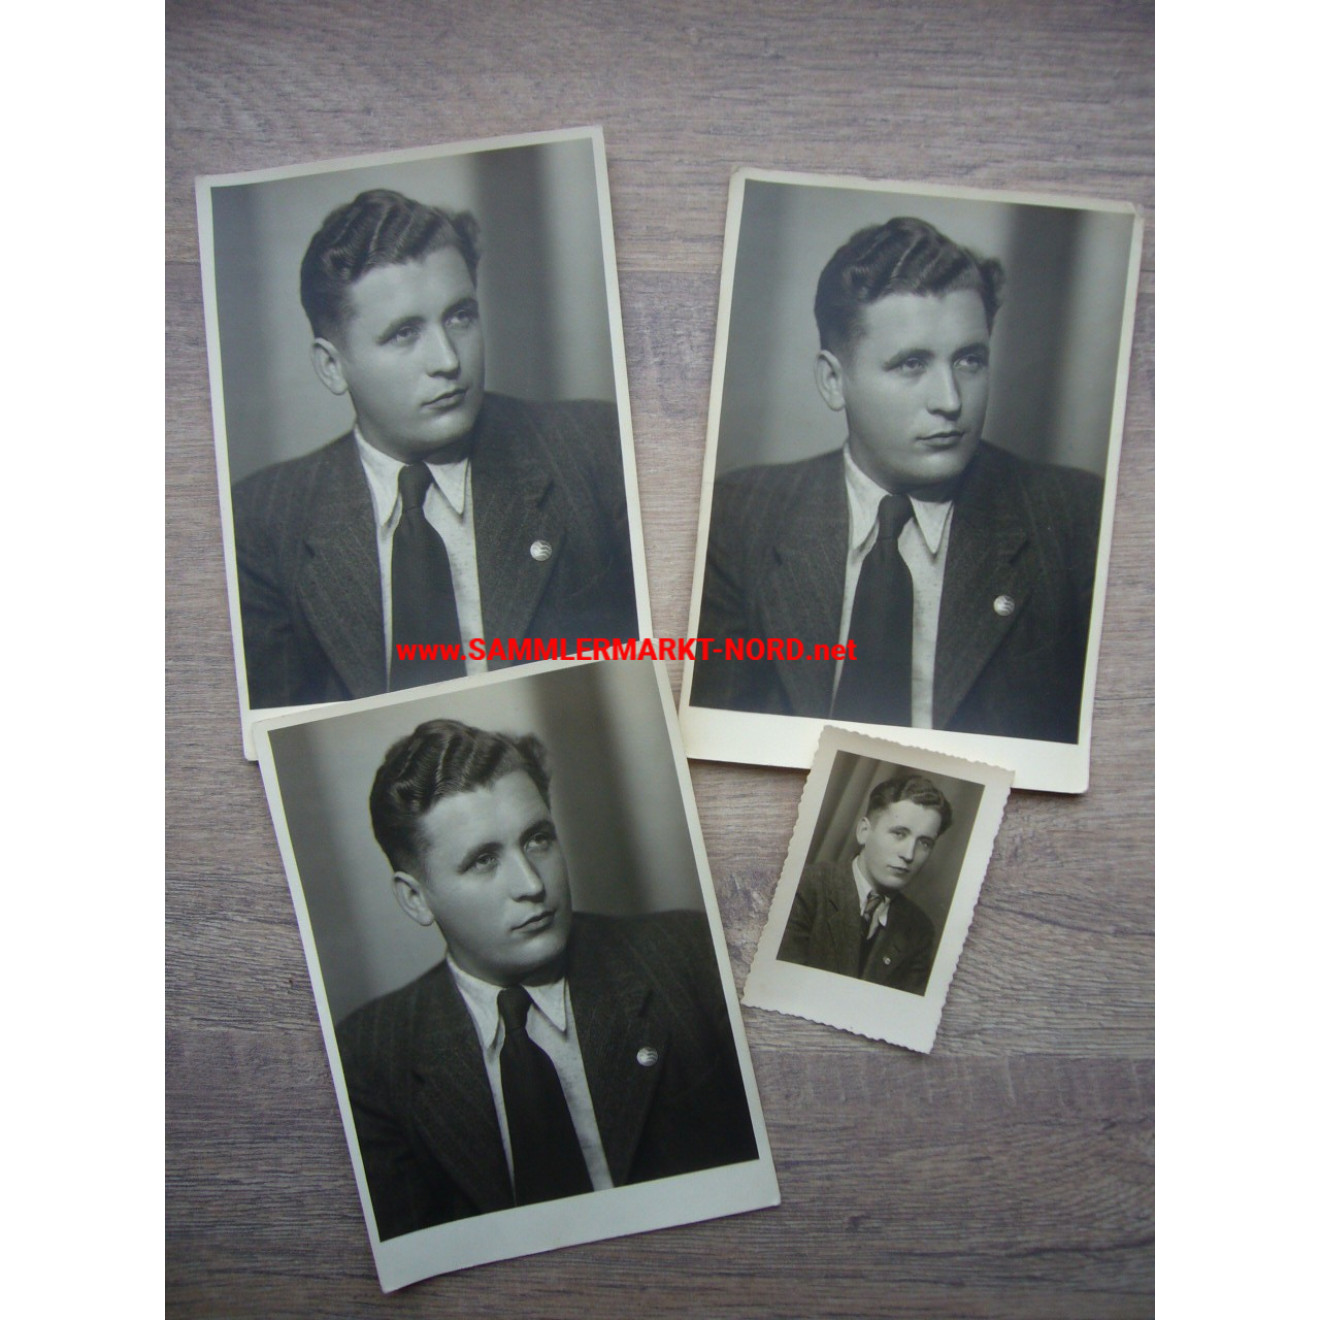 4 x portrait photo of young man with glider pilot badge & NSDAP party badge